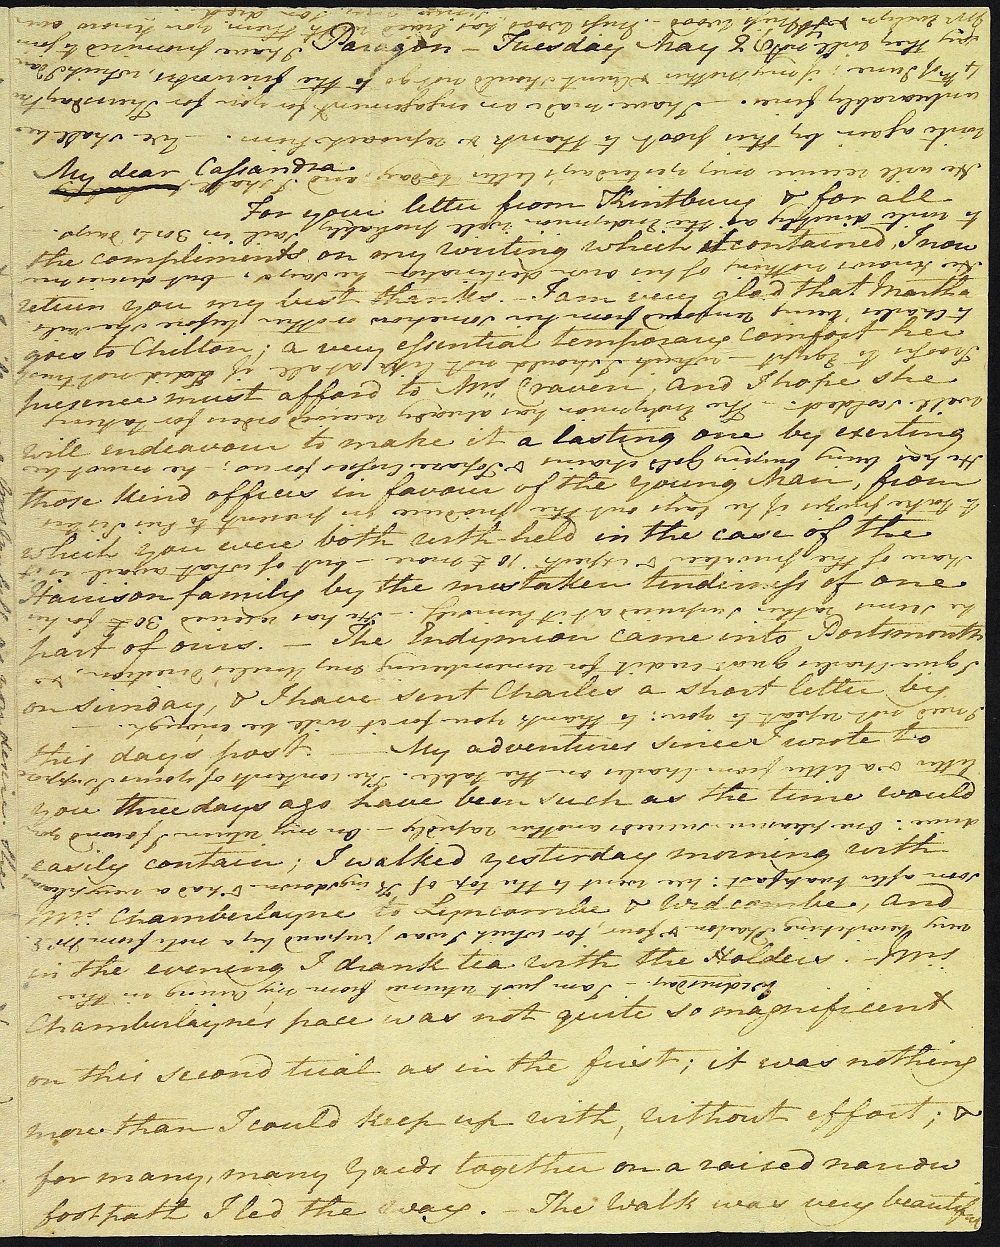 Letter from Jane Austen to Cassandra Austen, Tuesday 26th - Wednesday 27th May 1801. Page 1